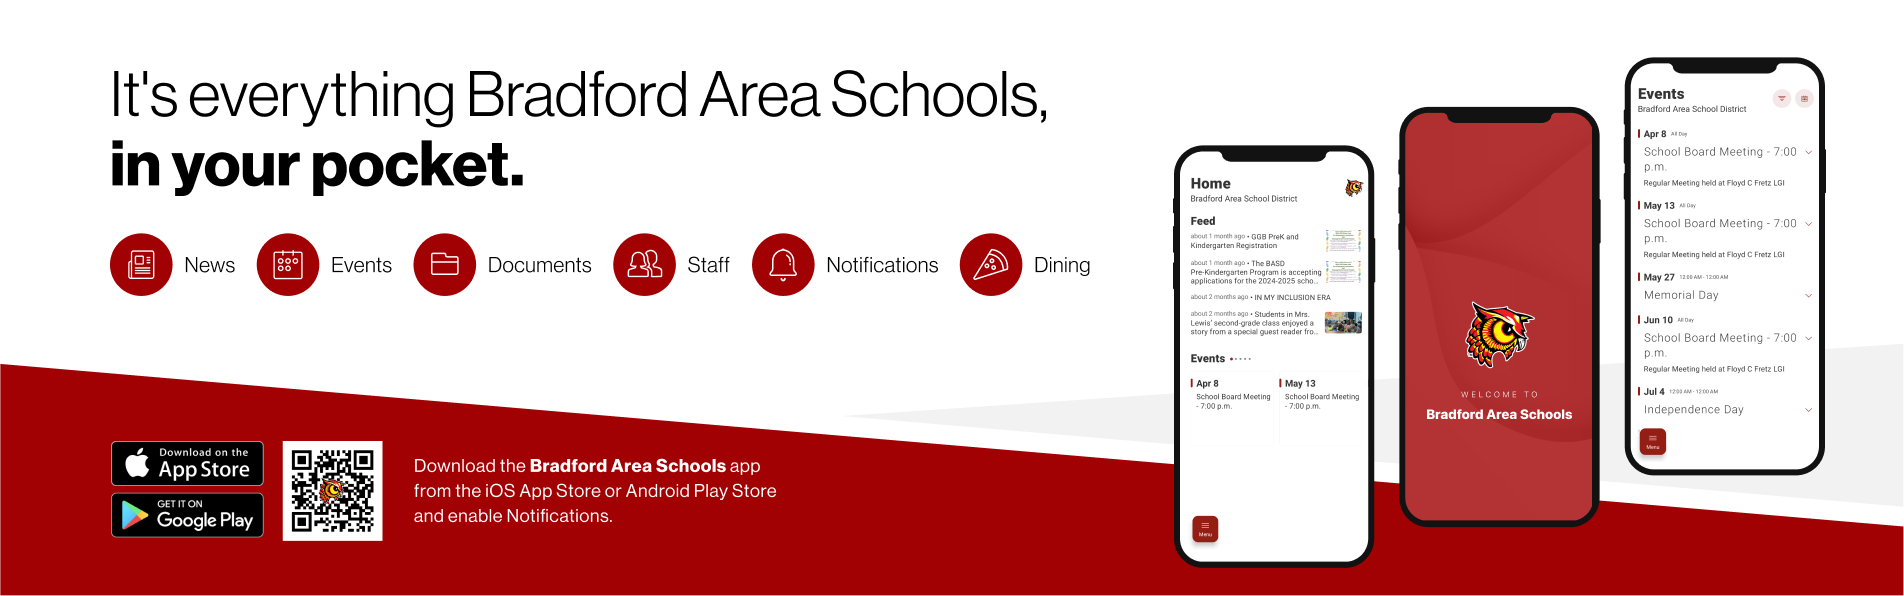 It’s everything Bradford Area Schools, in your pocket.